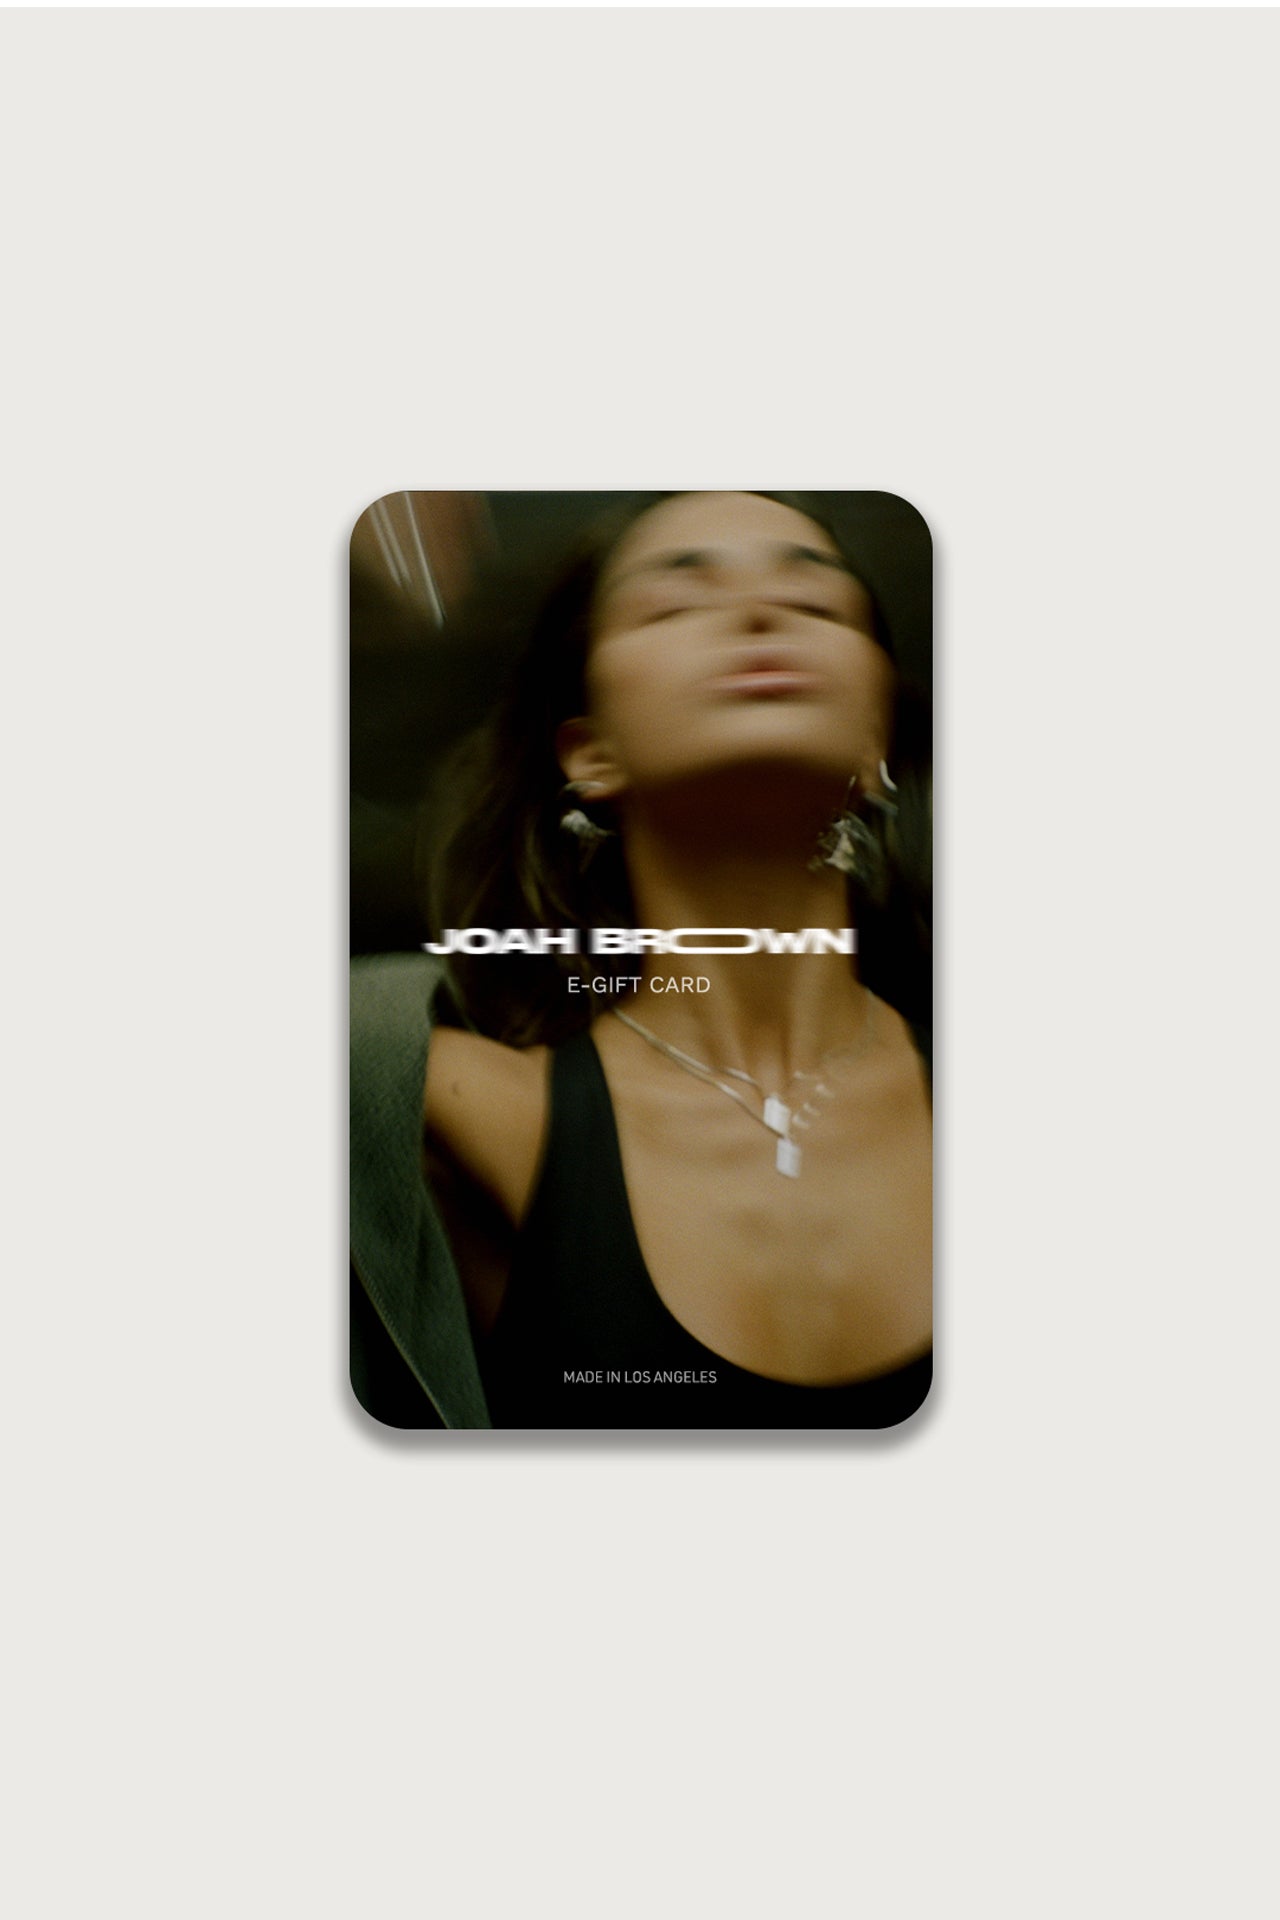 Front view of the Joah Brown gift card featuring a picture of a model posing in the background and the Joah Brown logo in the foreground 